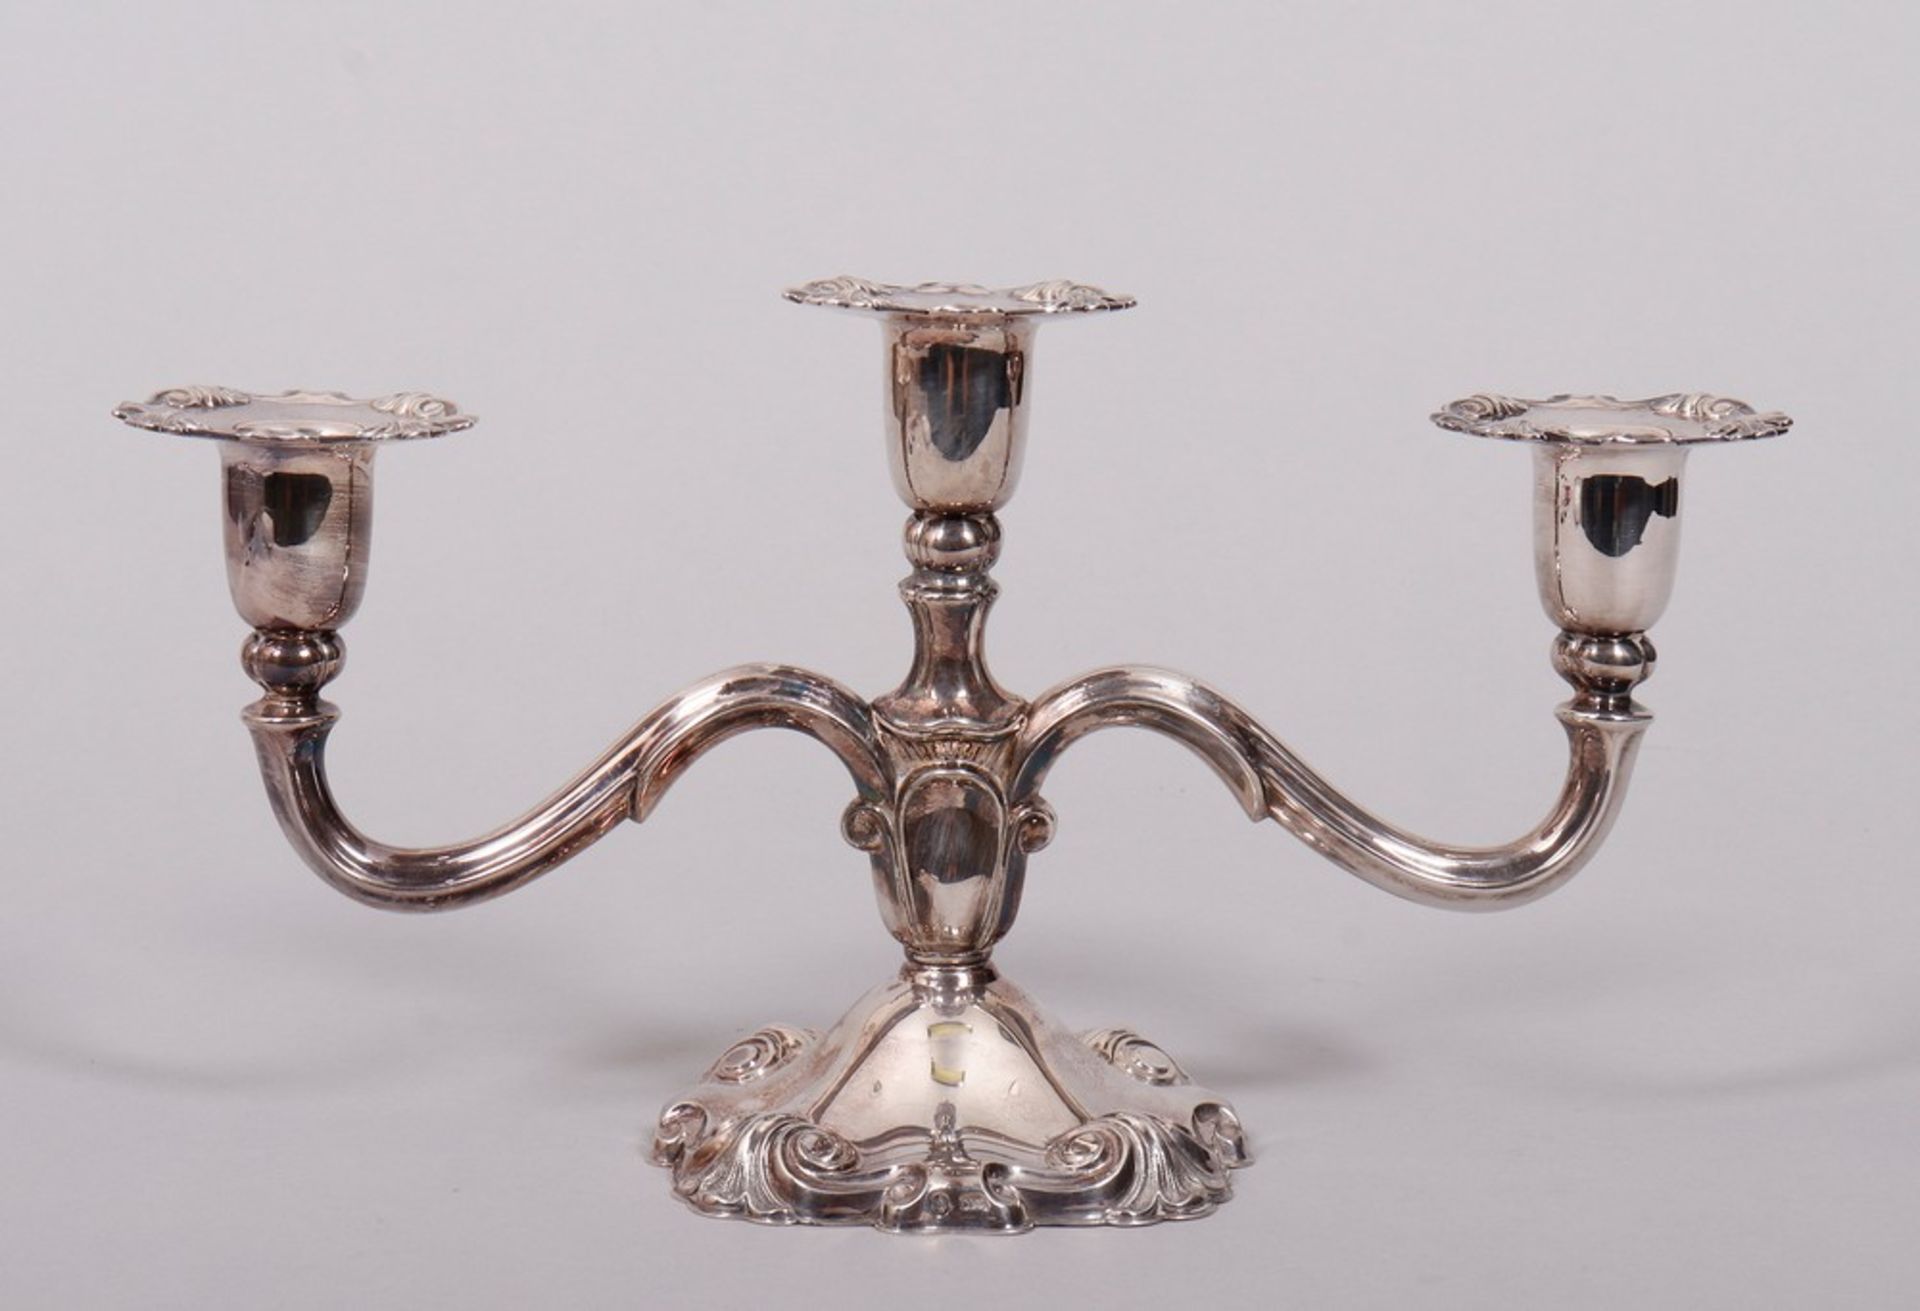 Small candelabra, 835 silver, C.M. Cohr, Fredericia, c. 1959 - Image 2 of 4